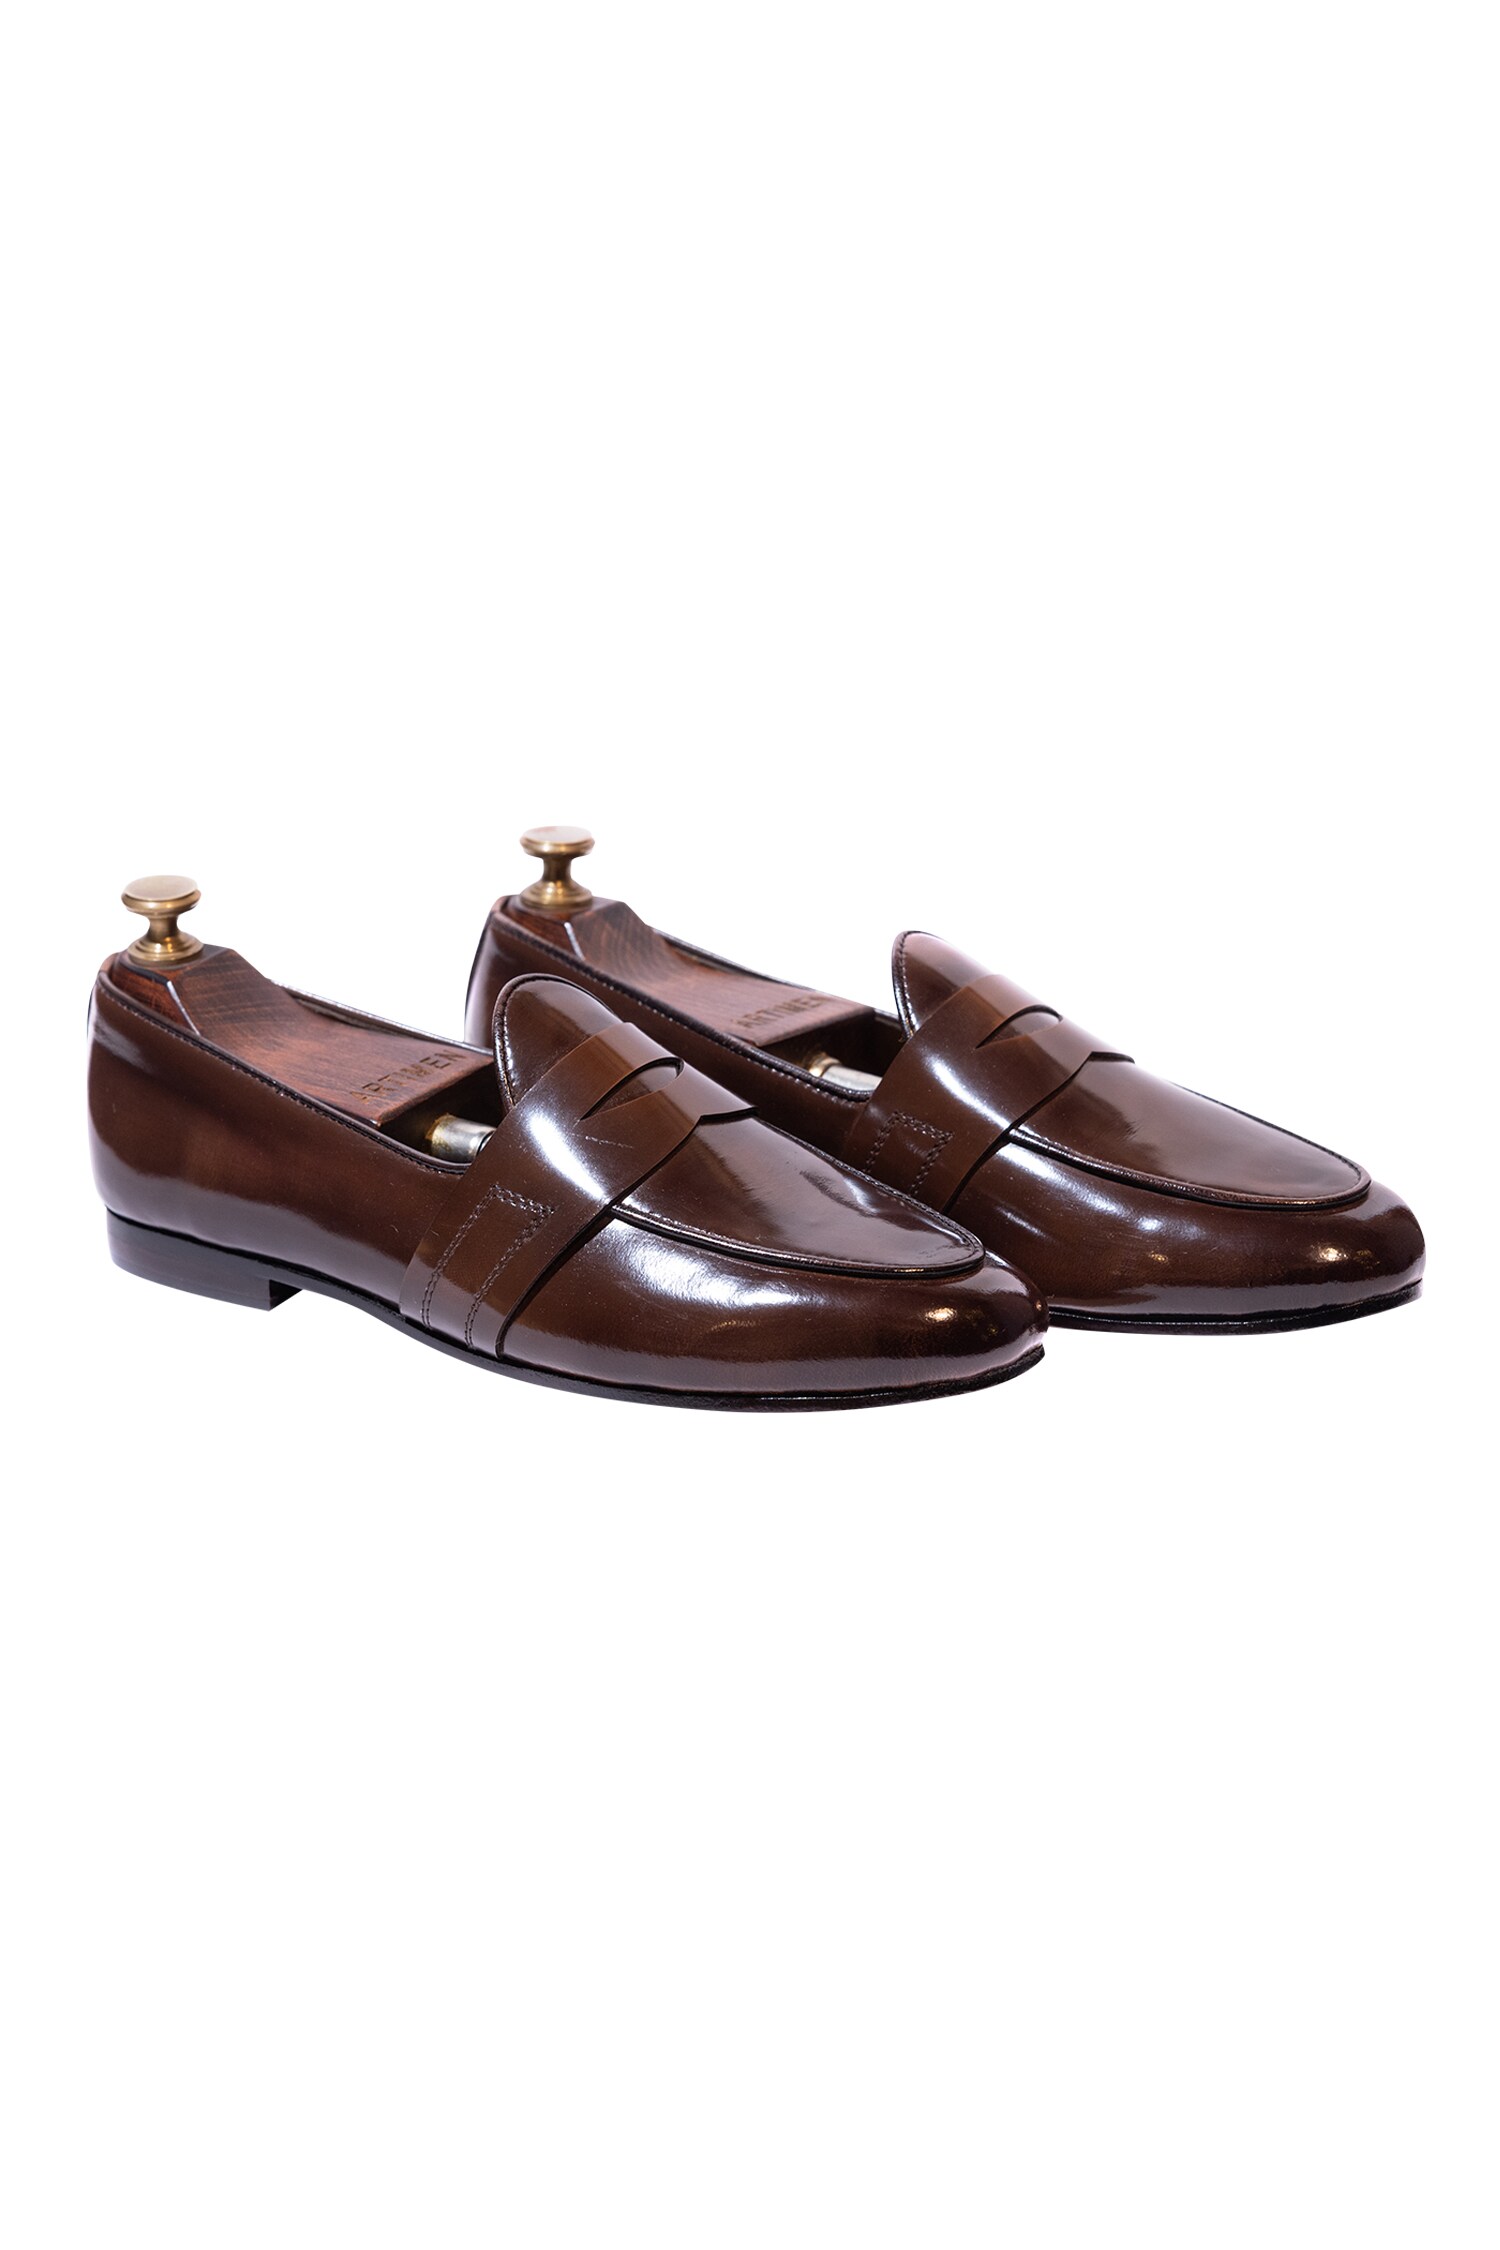 Artimen Brown Leather Handcrafted Penny Loafers